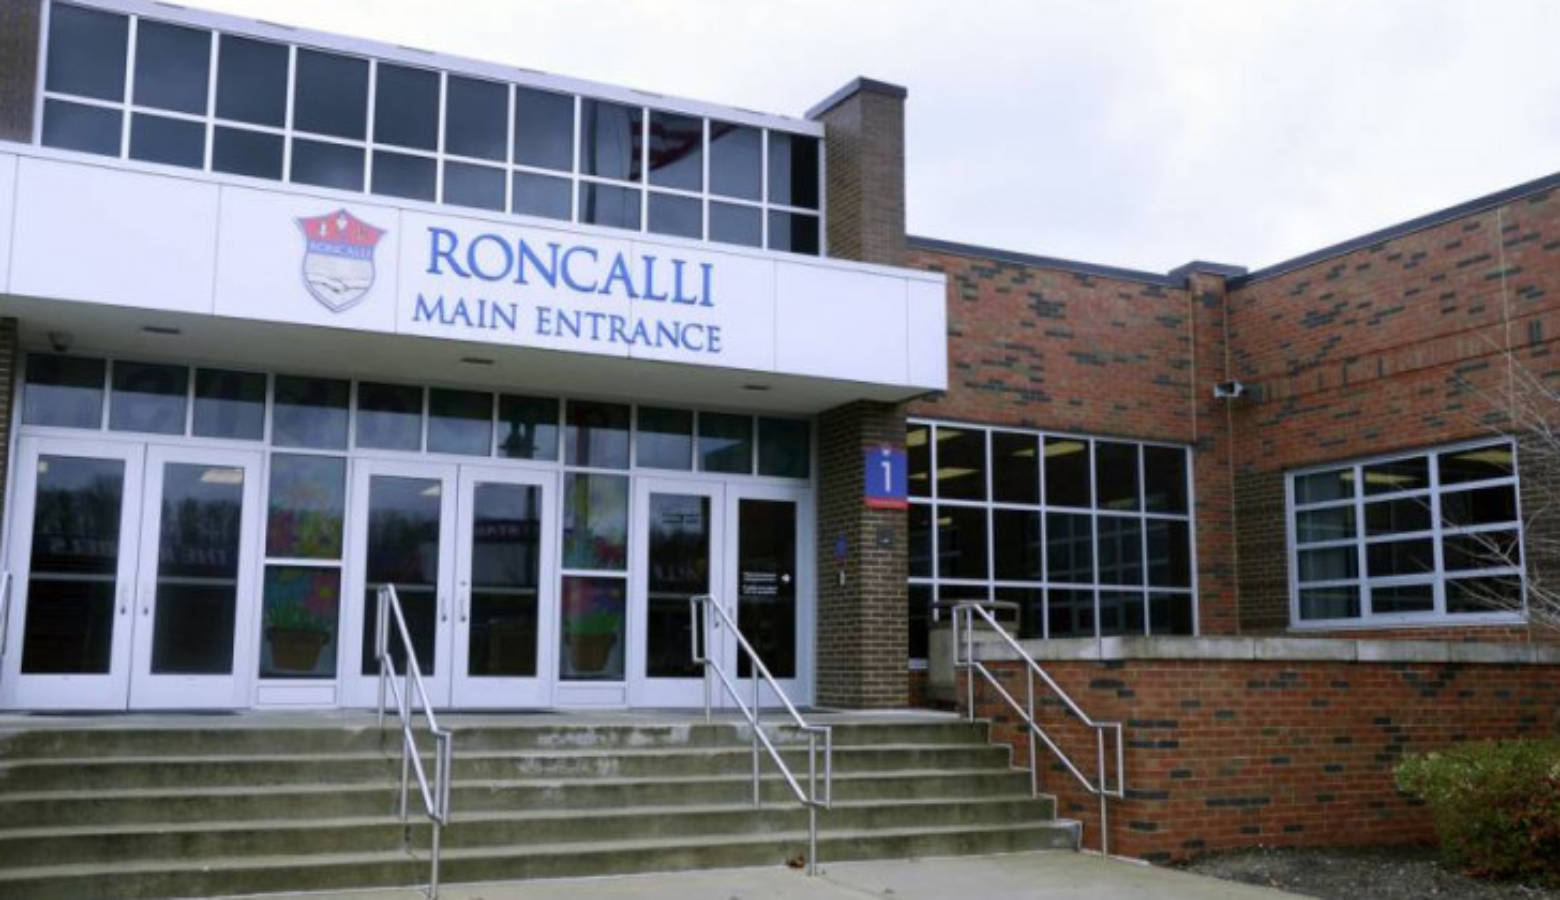 Last year, Roncalli High School received $1.7 million in state funds from school vouchers.